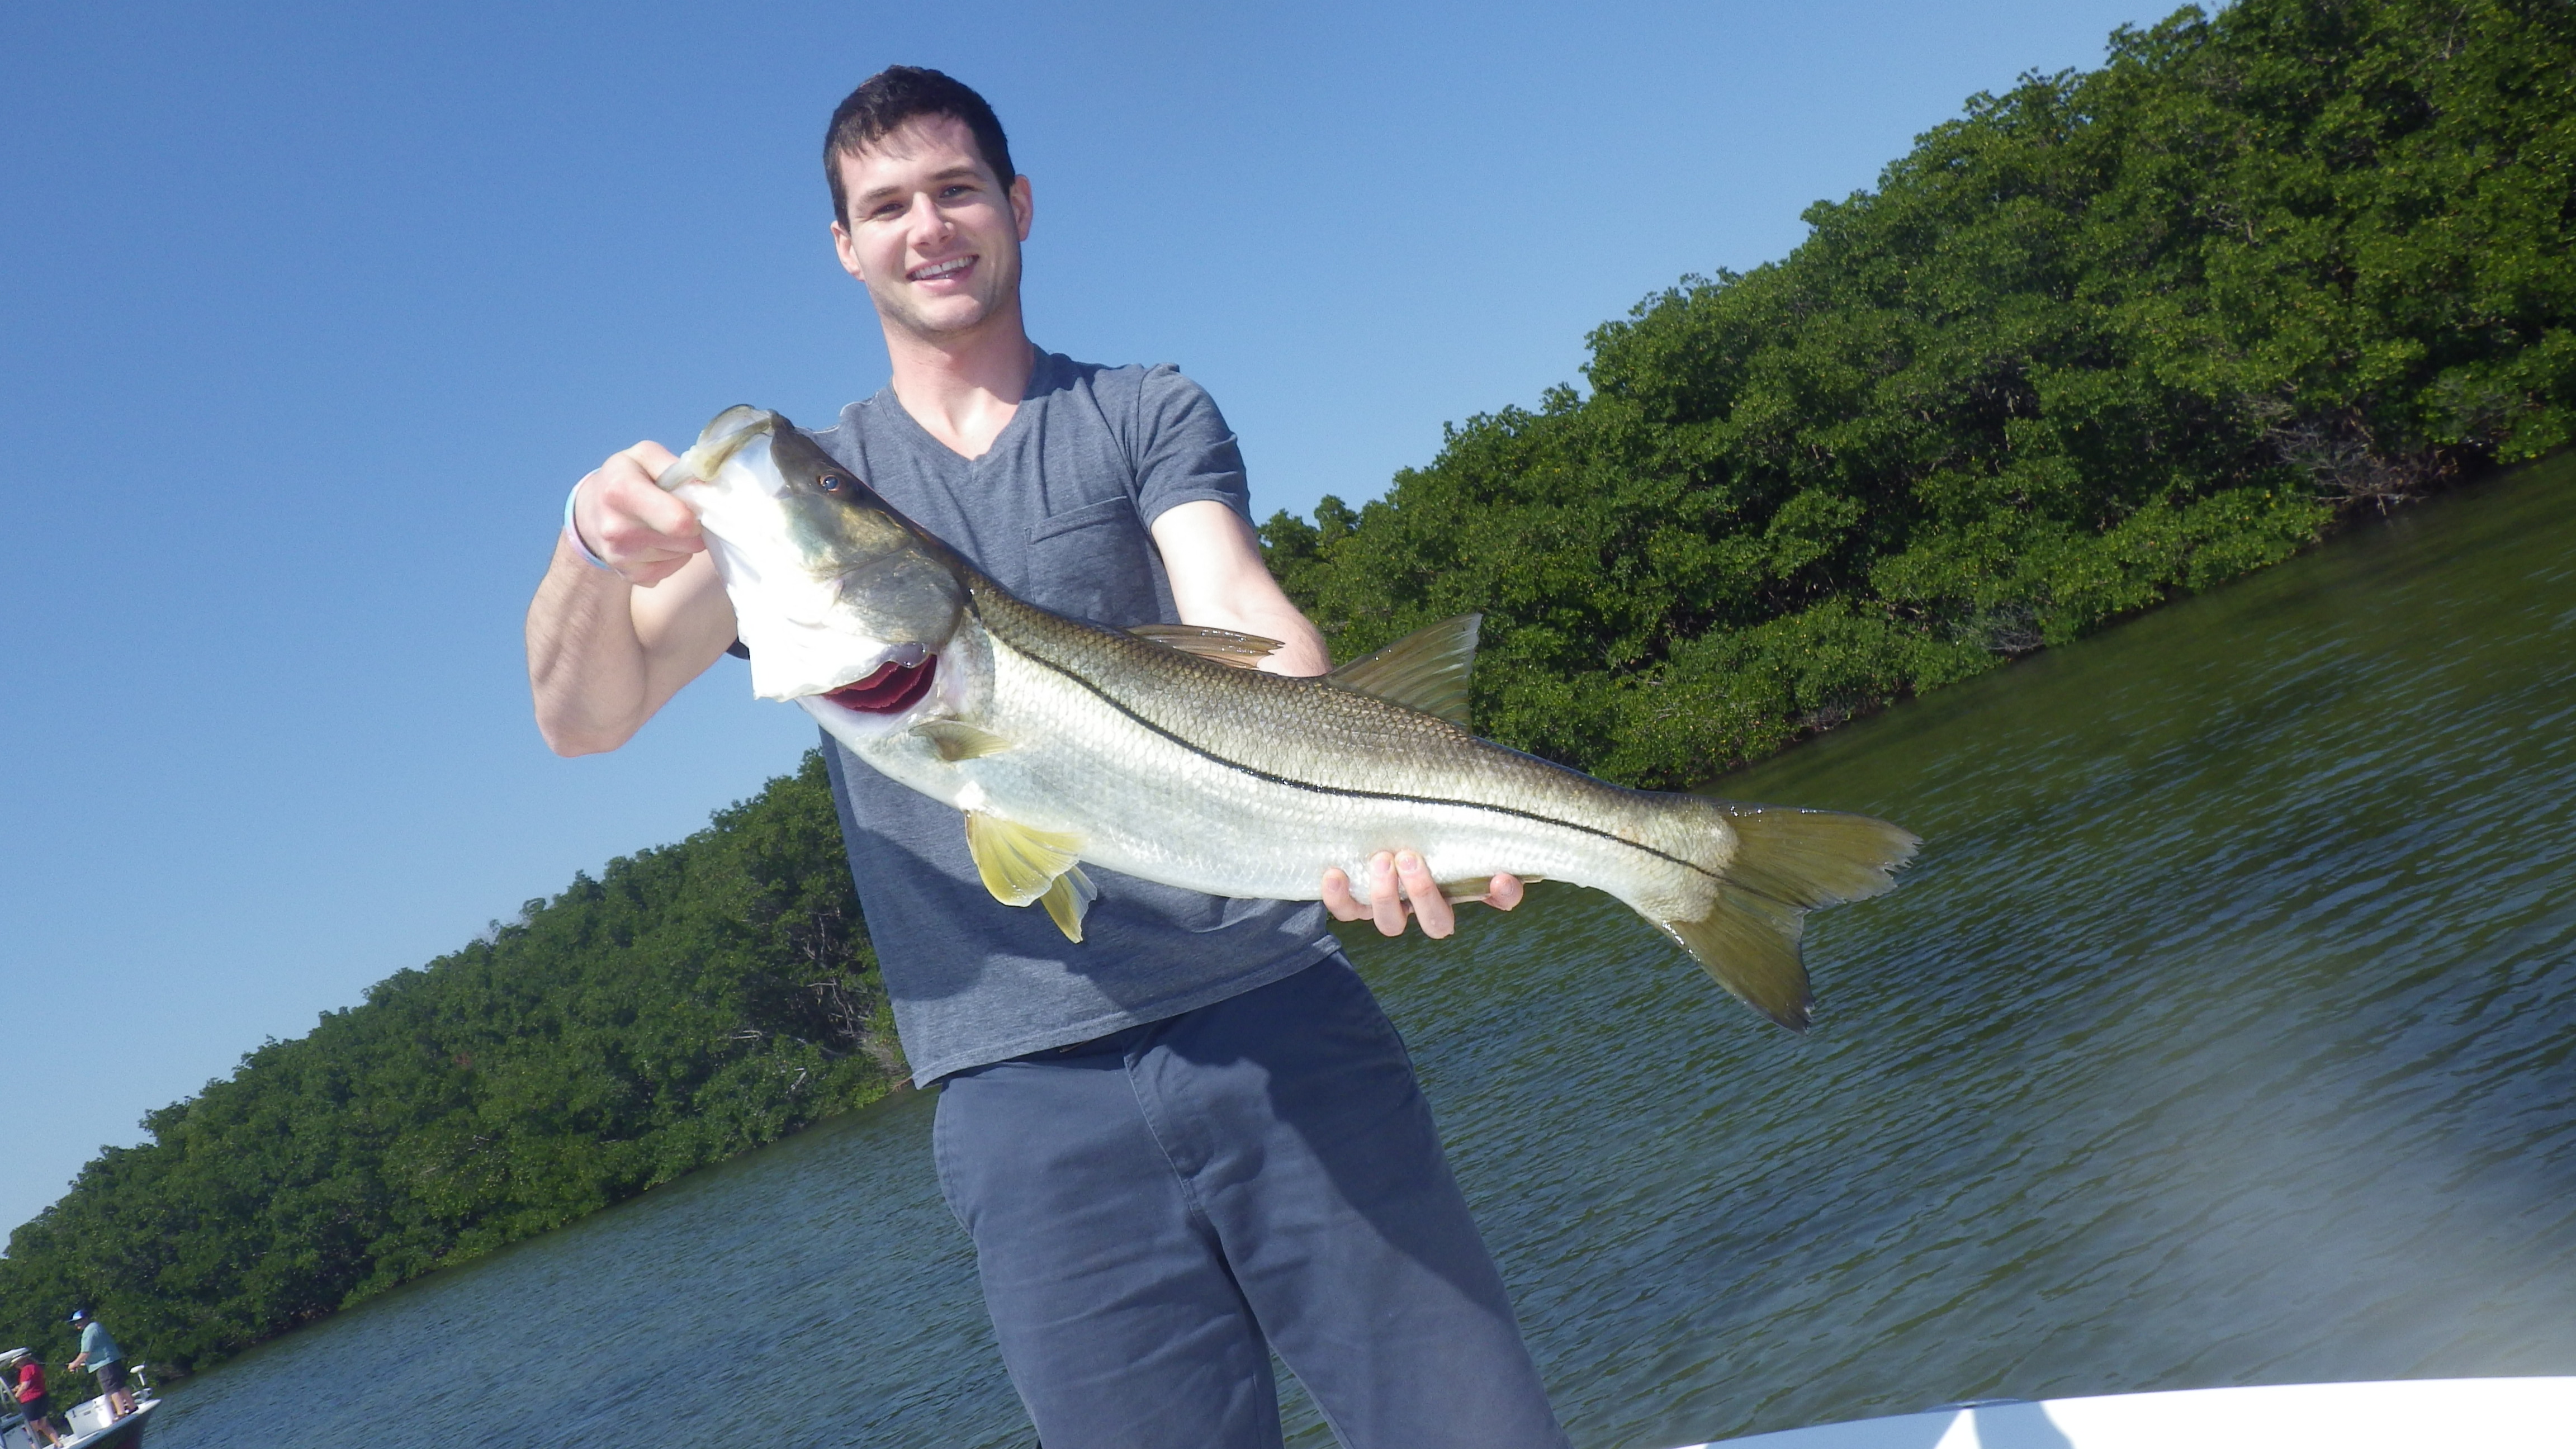 south tampa fishing charters, clearwater fishing charters, tampa fishing charters, tampa bay fishing charters, fishing charters tampa, fishing charters,